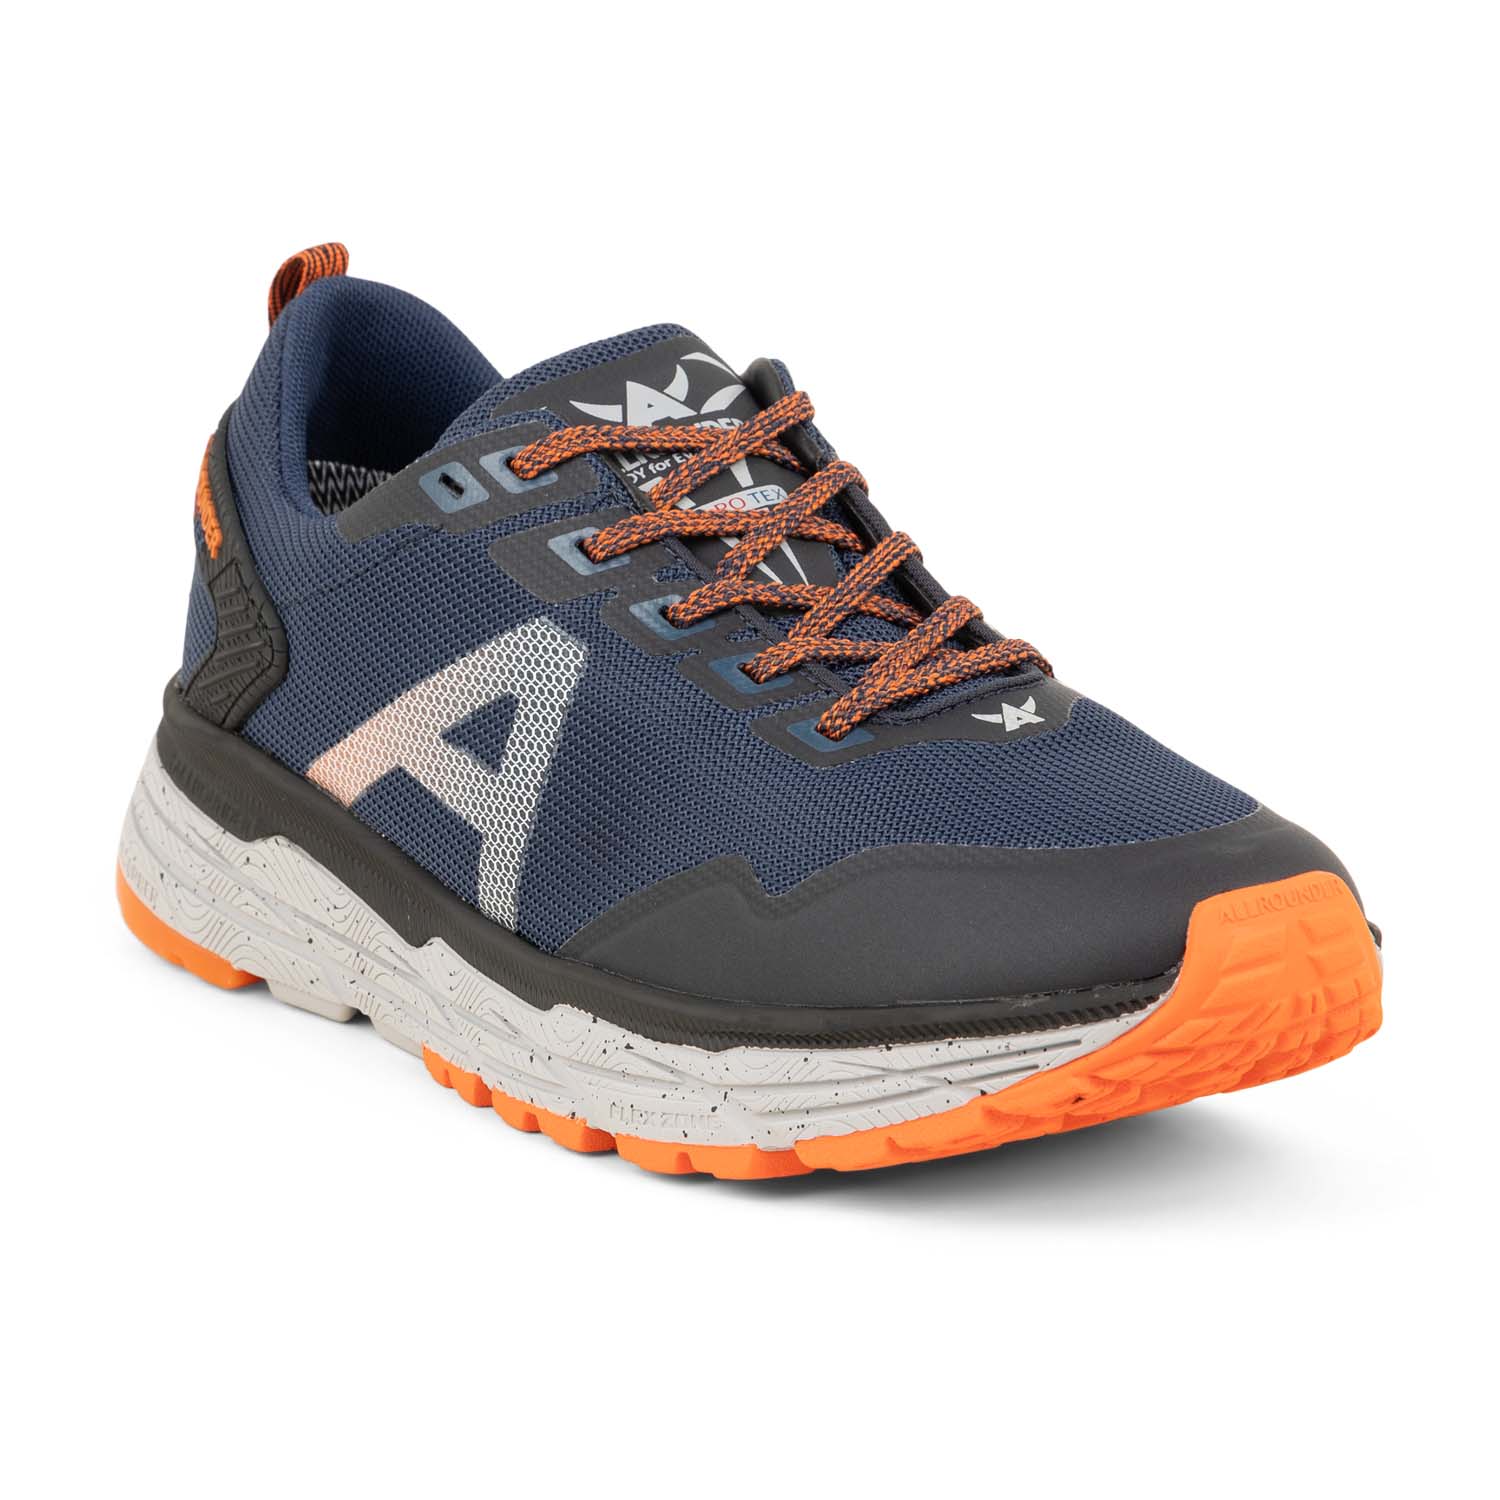 02 - ALLRIGHT TEX - ALLROUNDER BY MEPHISTO - Baskets - Synthétique